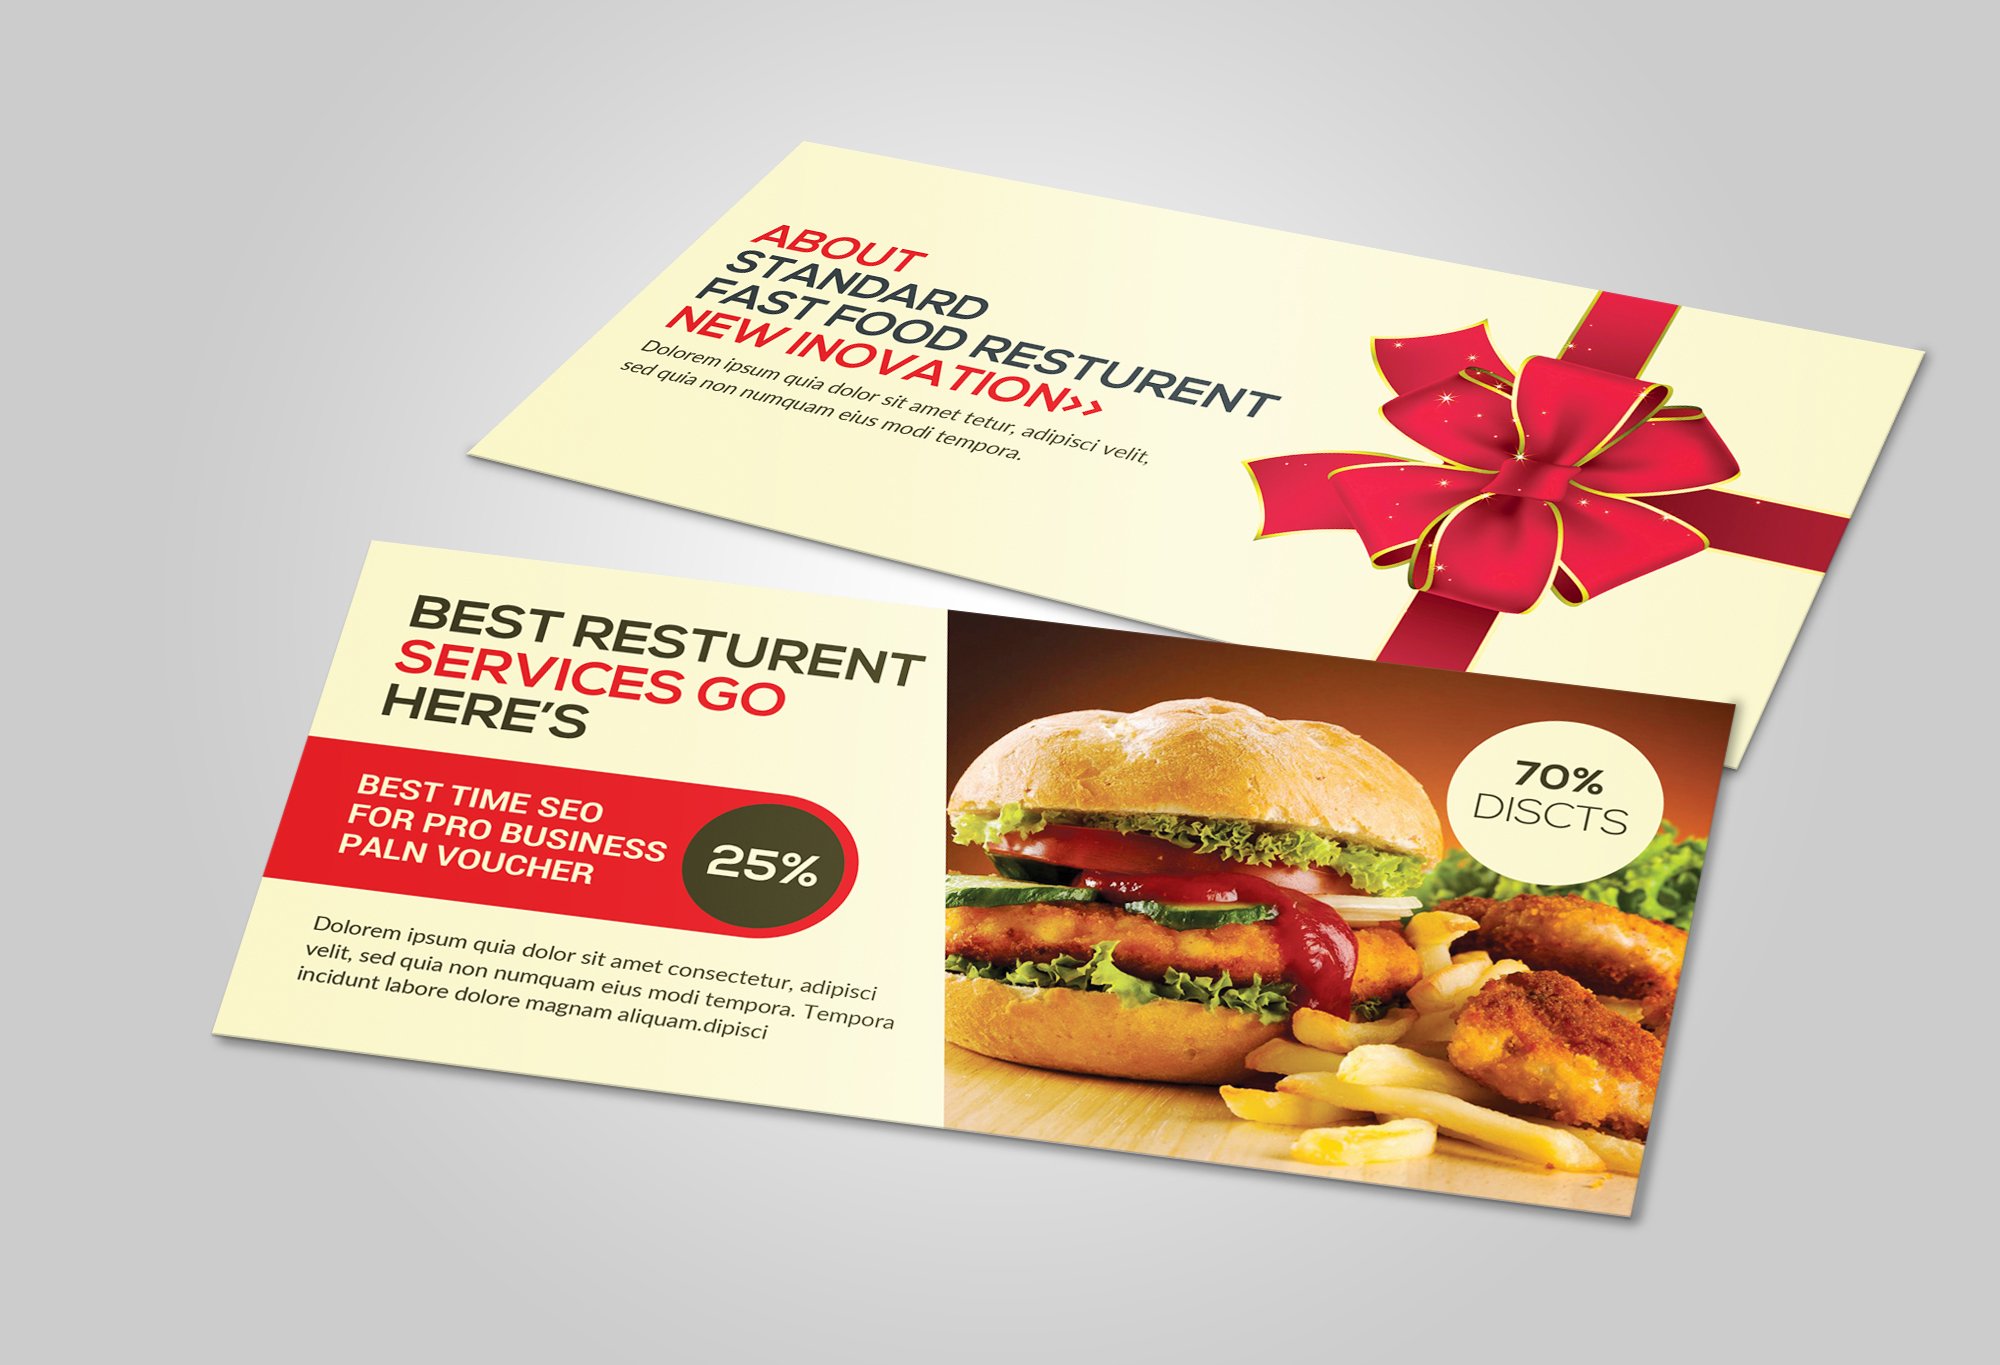 Food Discount Voucher cover image.